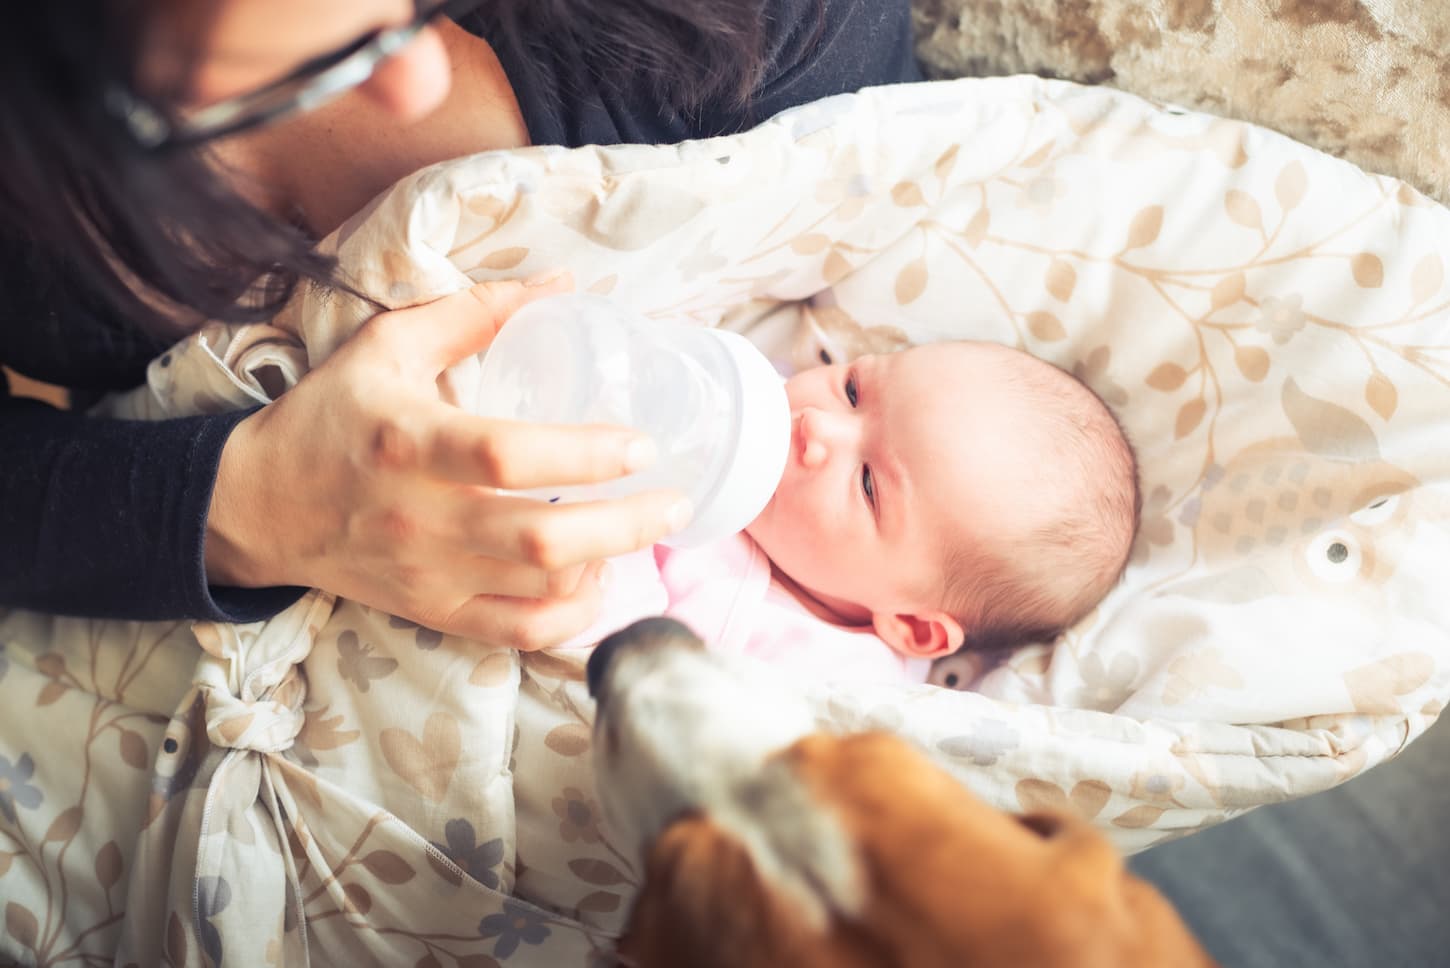 An image of a Mother feeding A newborn baby. A woman feeds a newborn with modified milk from a bottle.